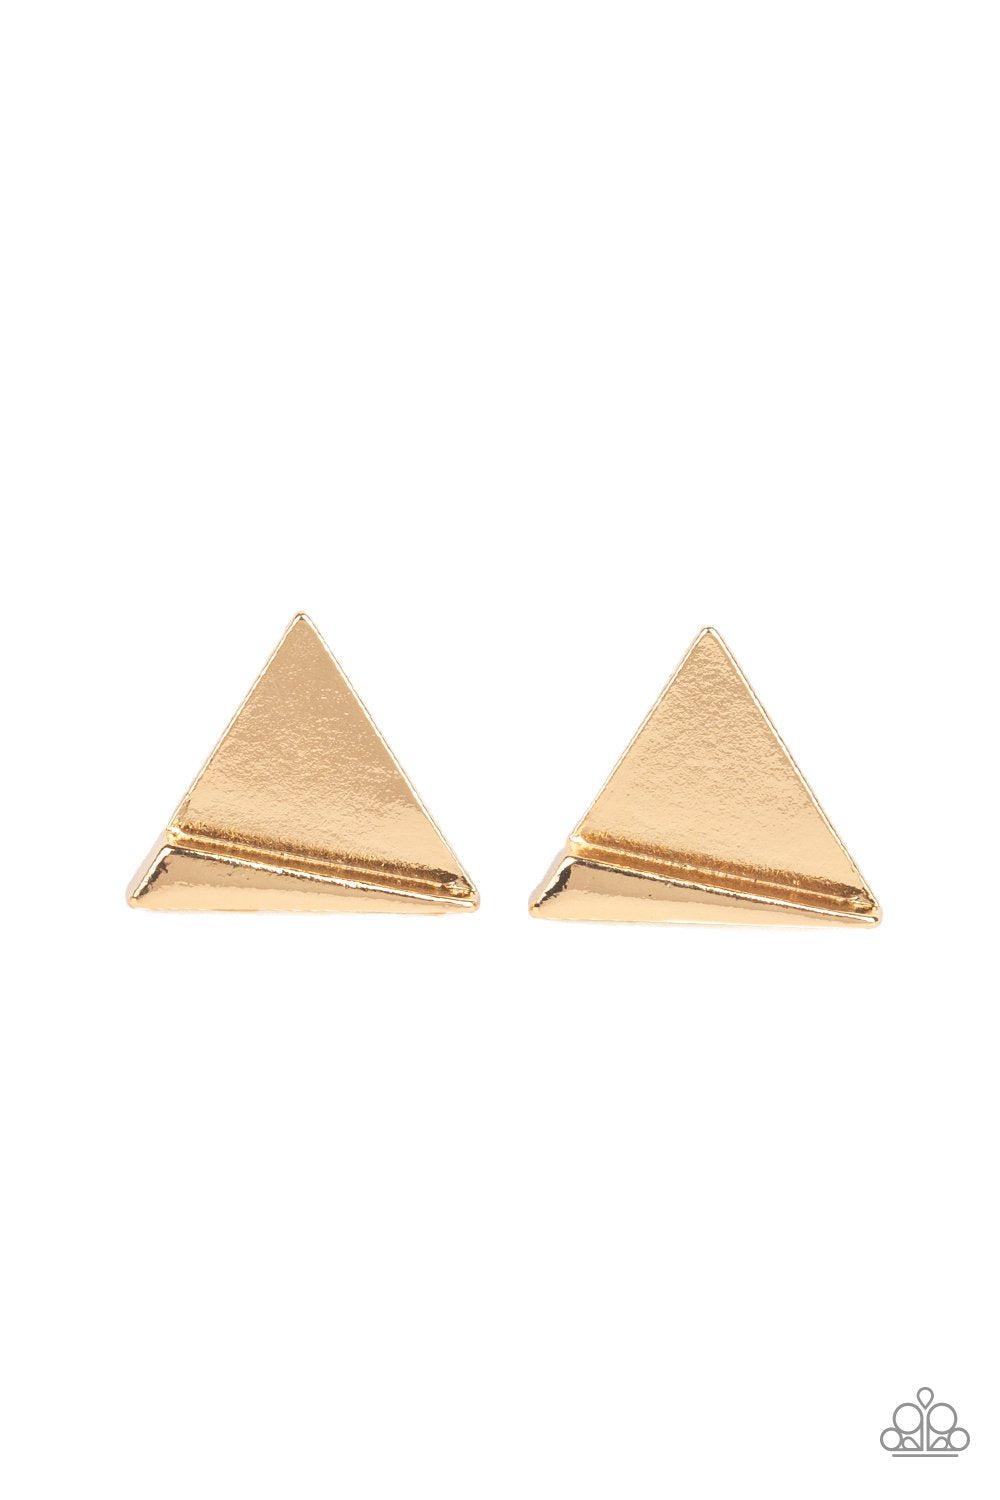 Die TRI-ing Gold Post Earrings - Paparazzi Accessories - lightbox -CarasShop.com - $5 Jewelry by Cara Jewels